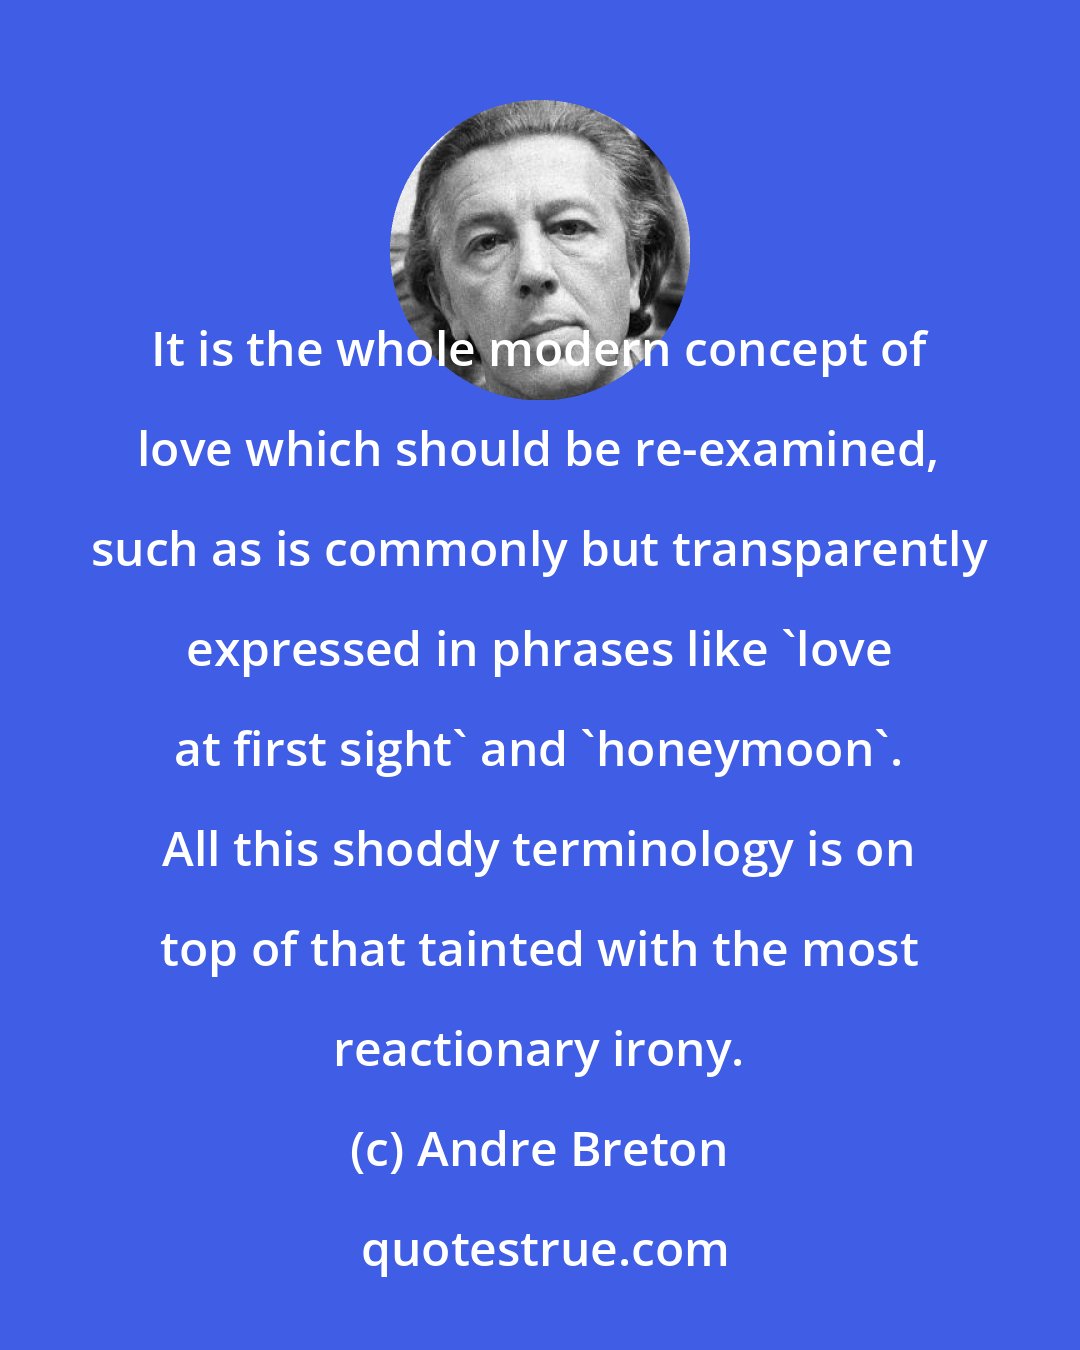 Andre Breton: It is the whole modern concept of love which should be re-examined, such as is commonly but transparently expressed in phrases like 'love at first sight' and 'honeymoon'. All this shoddy terminology is on top of that tainted with the most reactionary irony.